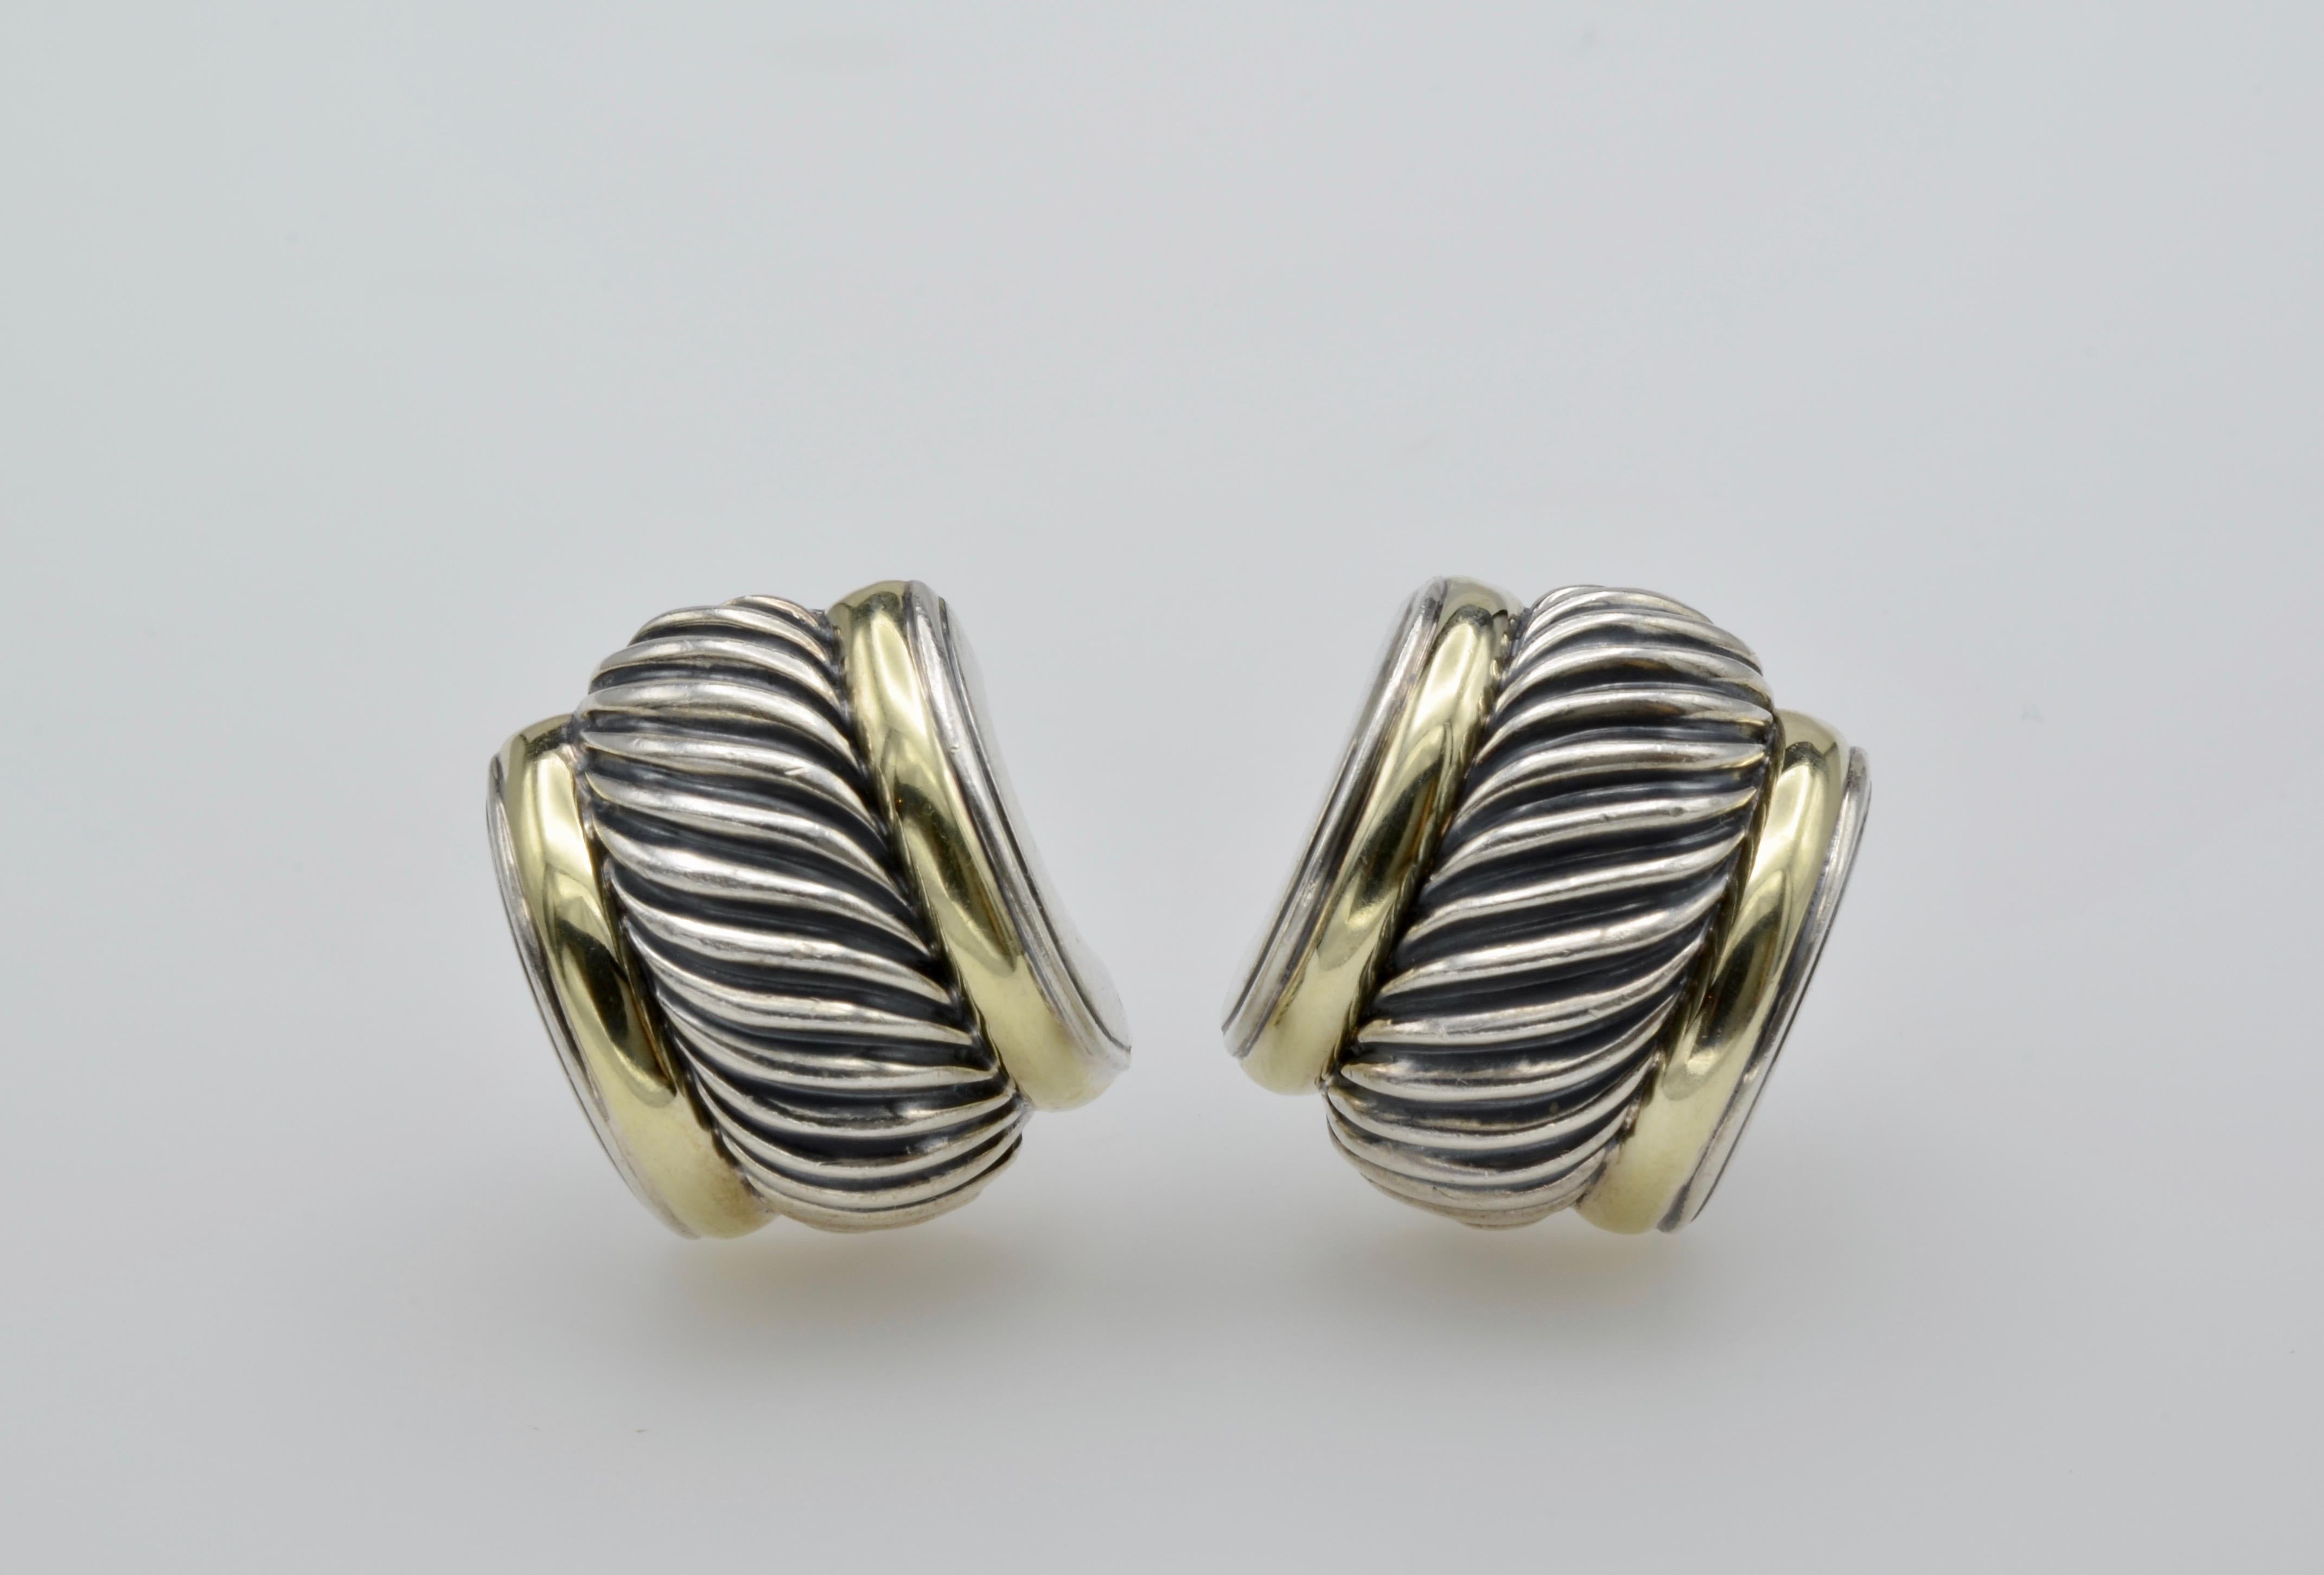 These lovely and classic post clip earrings are lightweight and comfortable. The Swirl design is ancient and modern in feeling and the 18k outside rim is the perfect accent.

